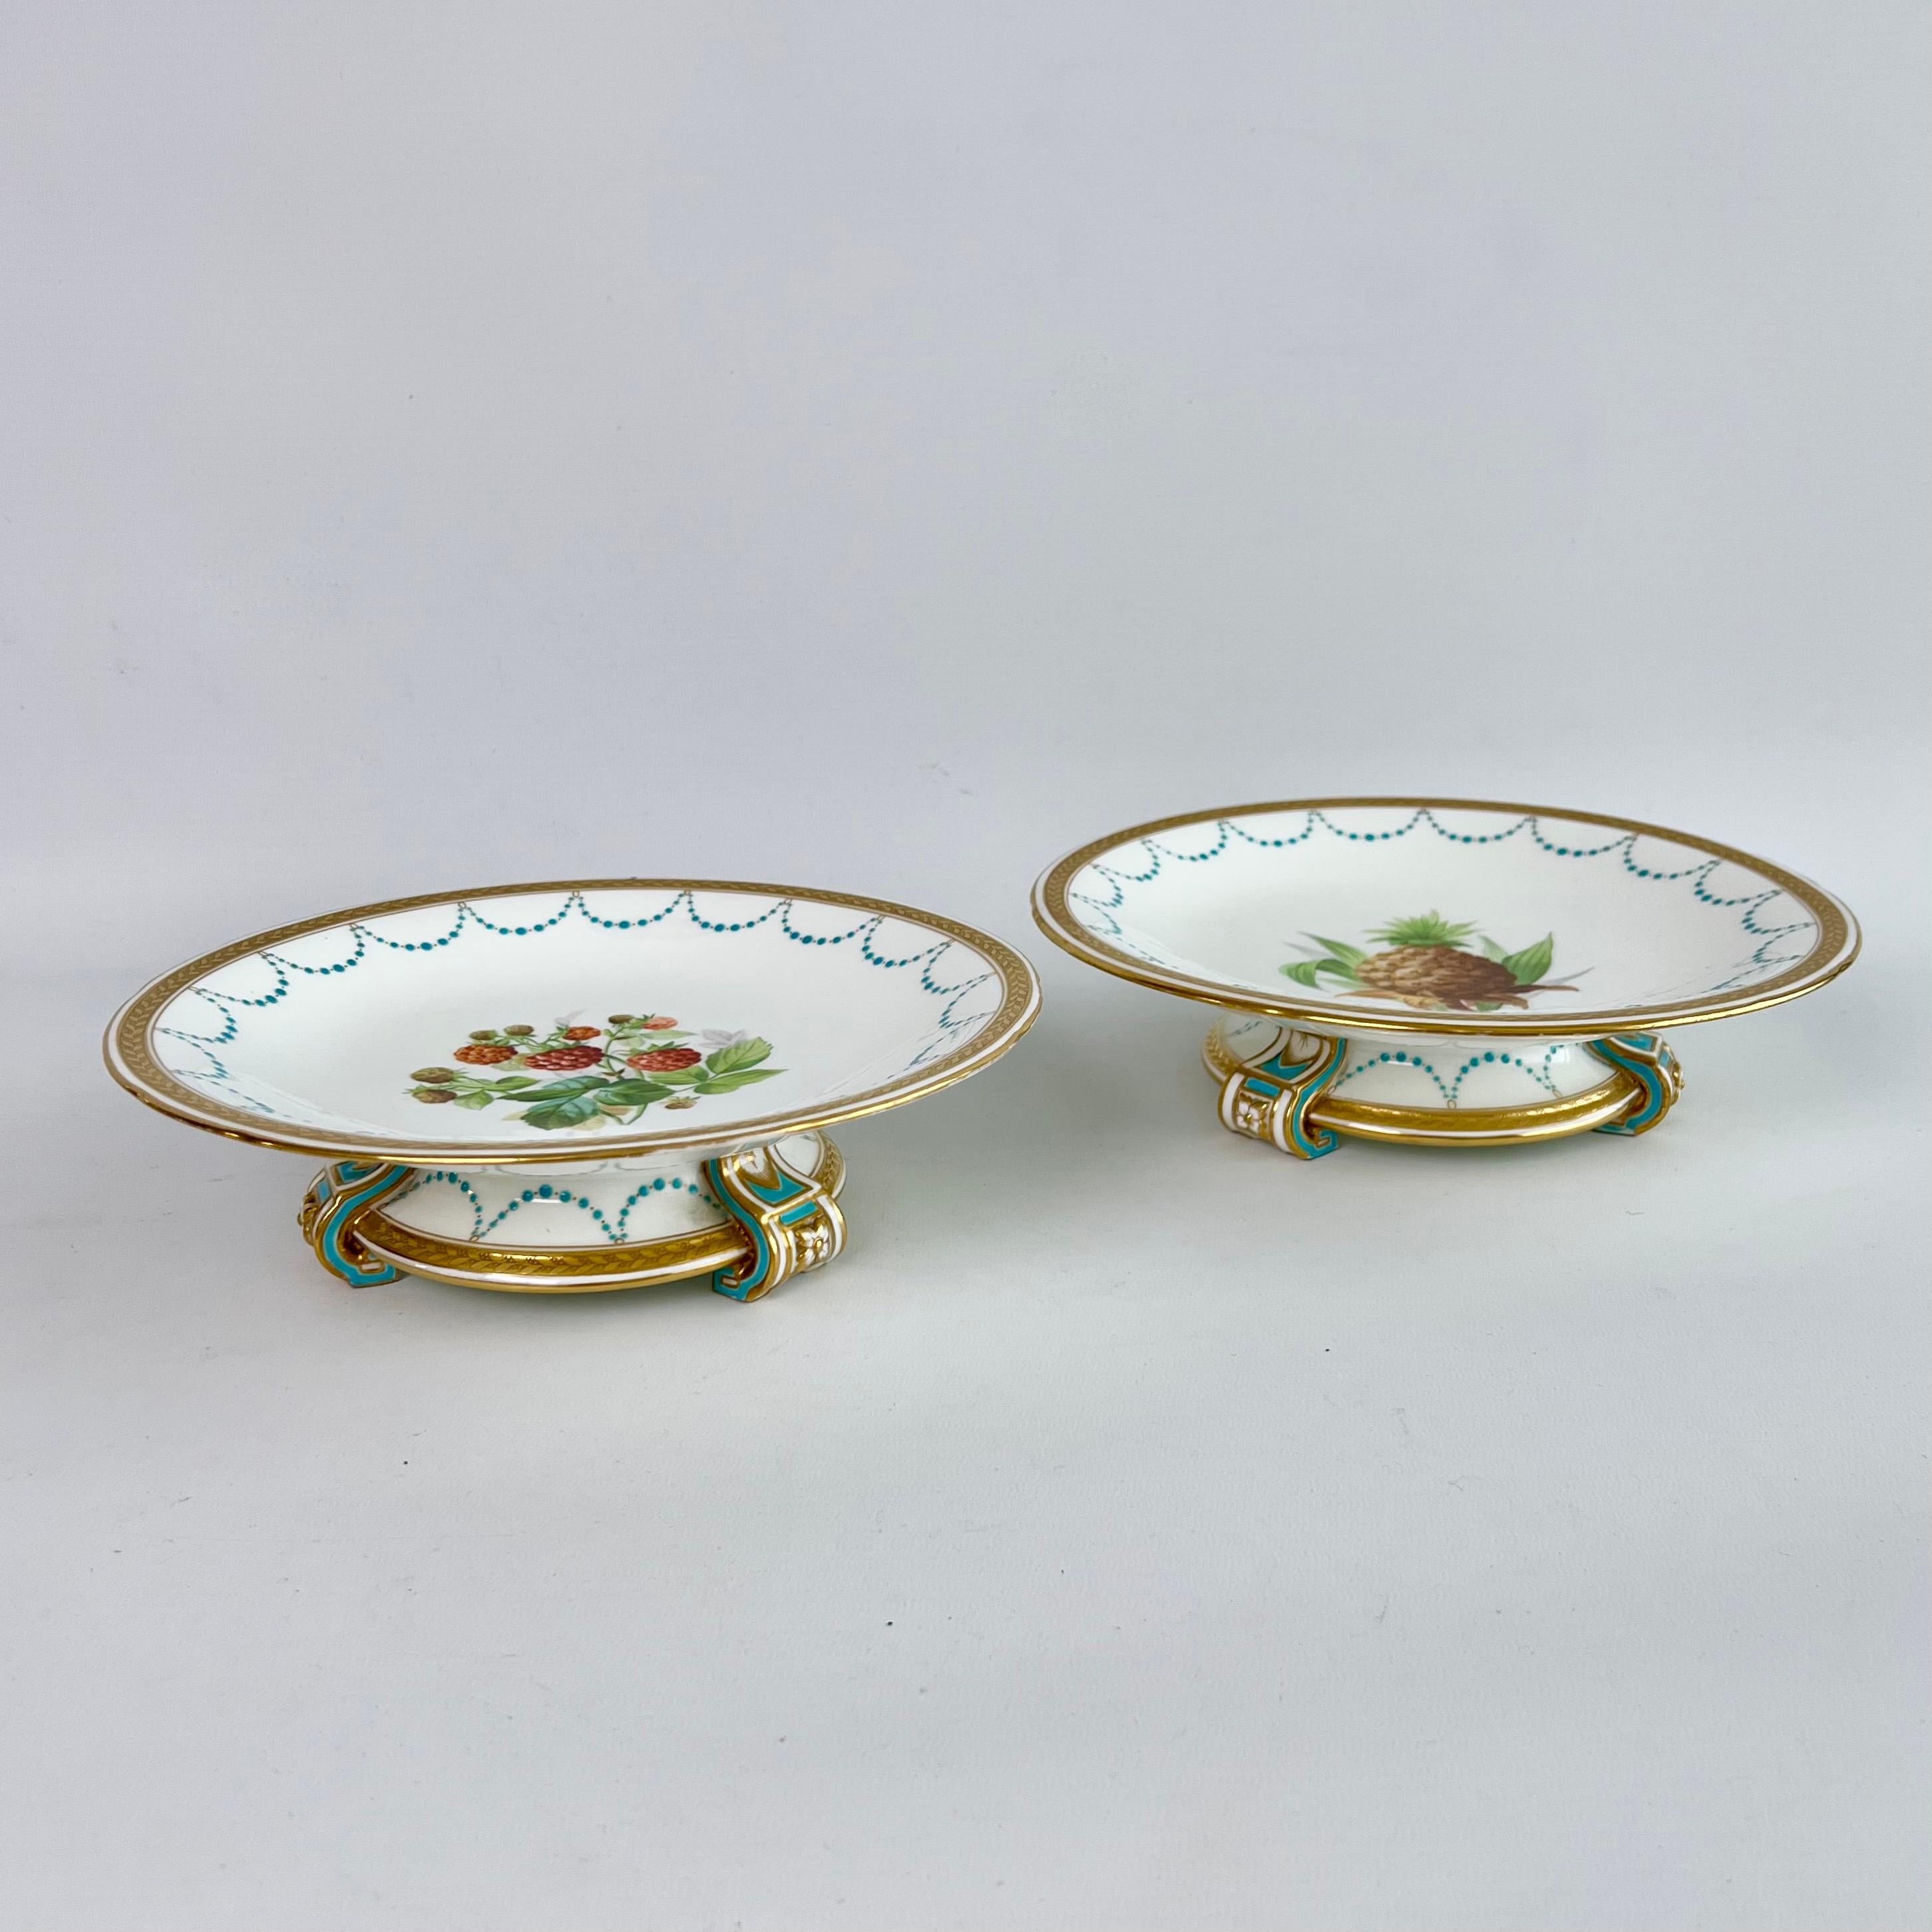 English Minton Porcelain Dessert Service, Turquoise and Gilt, Flowers and Fruits, 1870